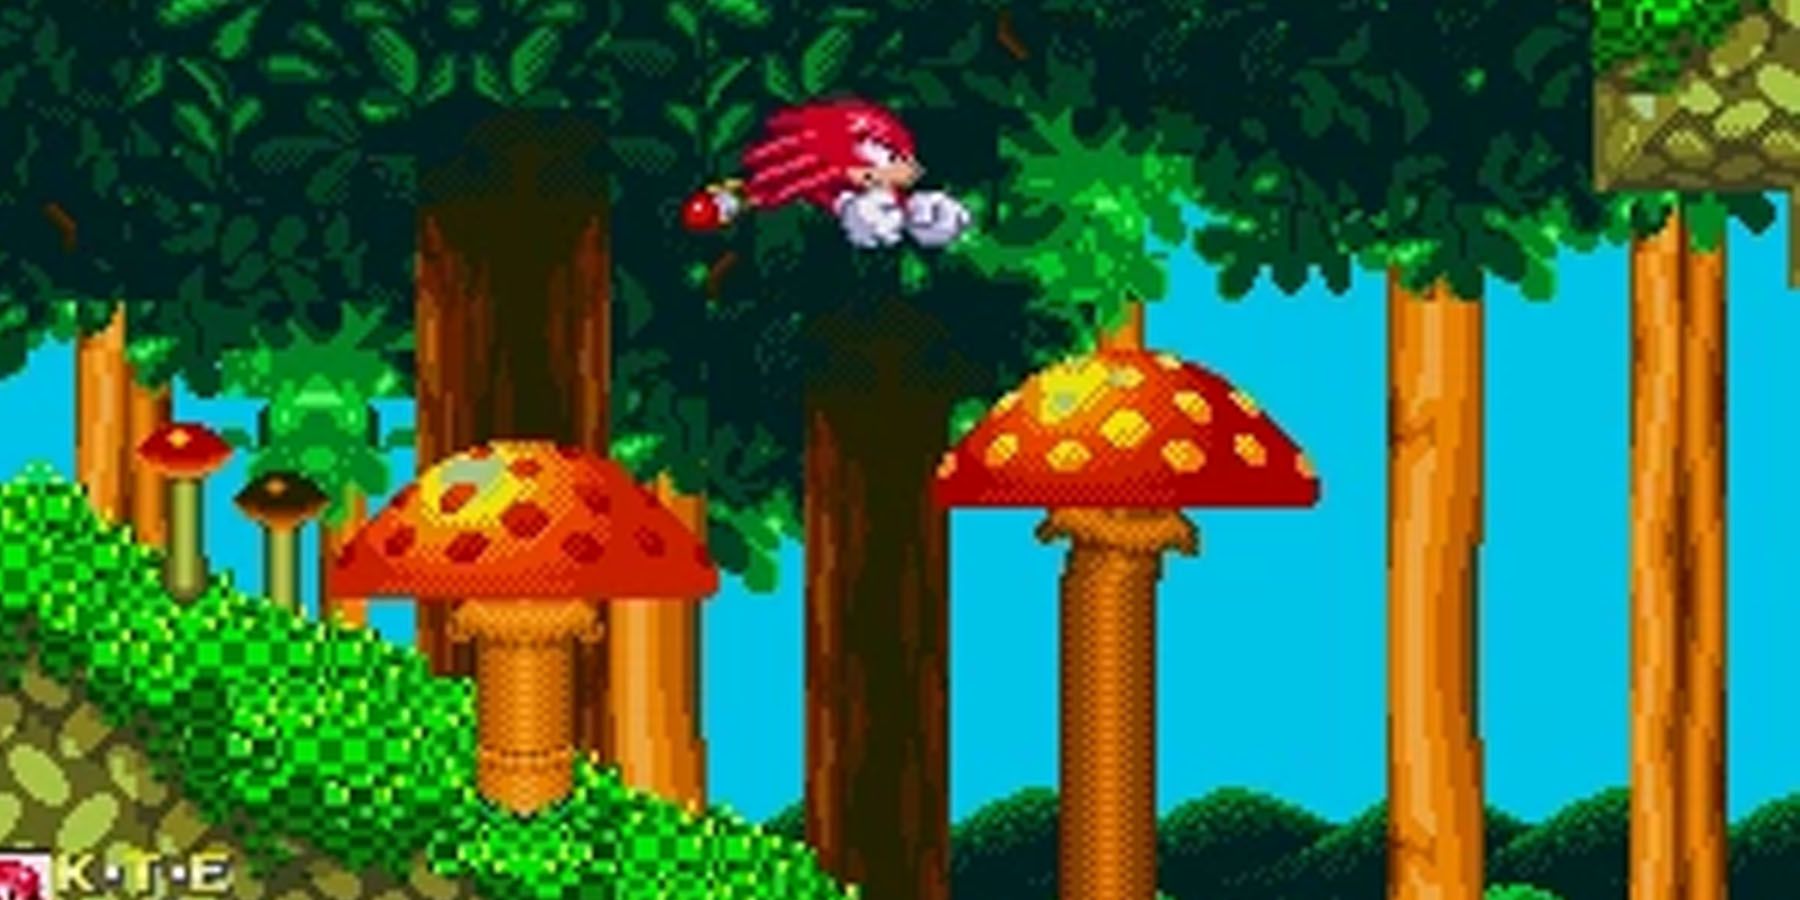 Knuckles gliding in mid air